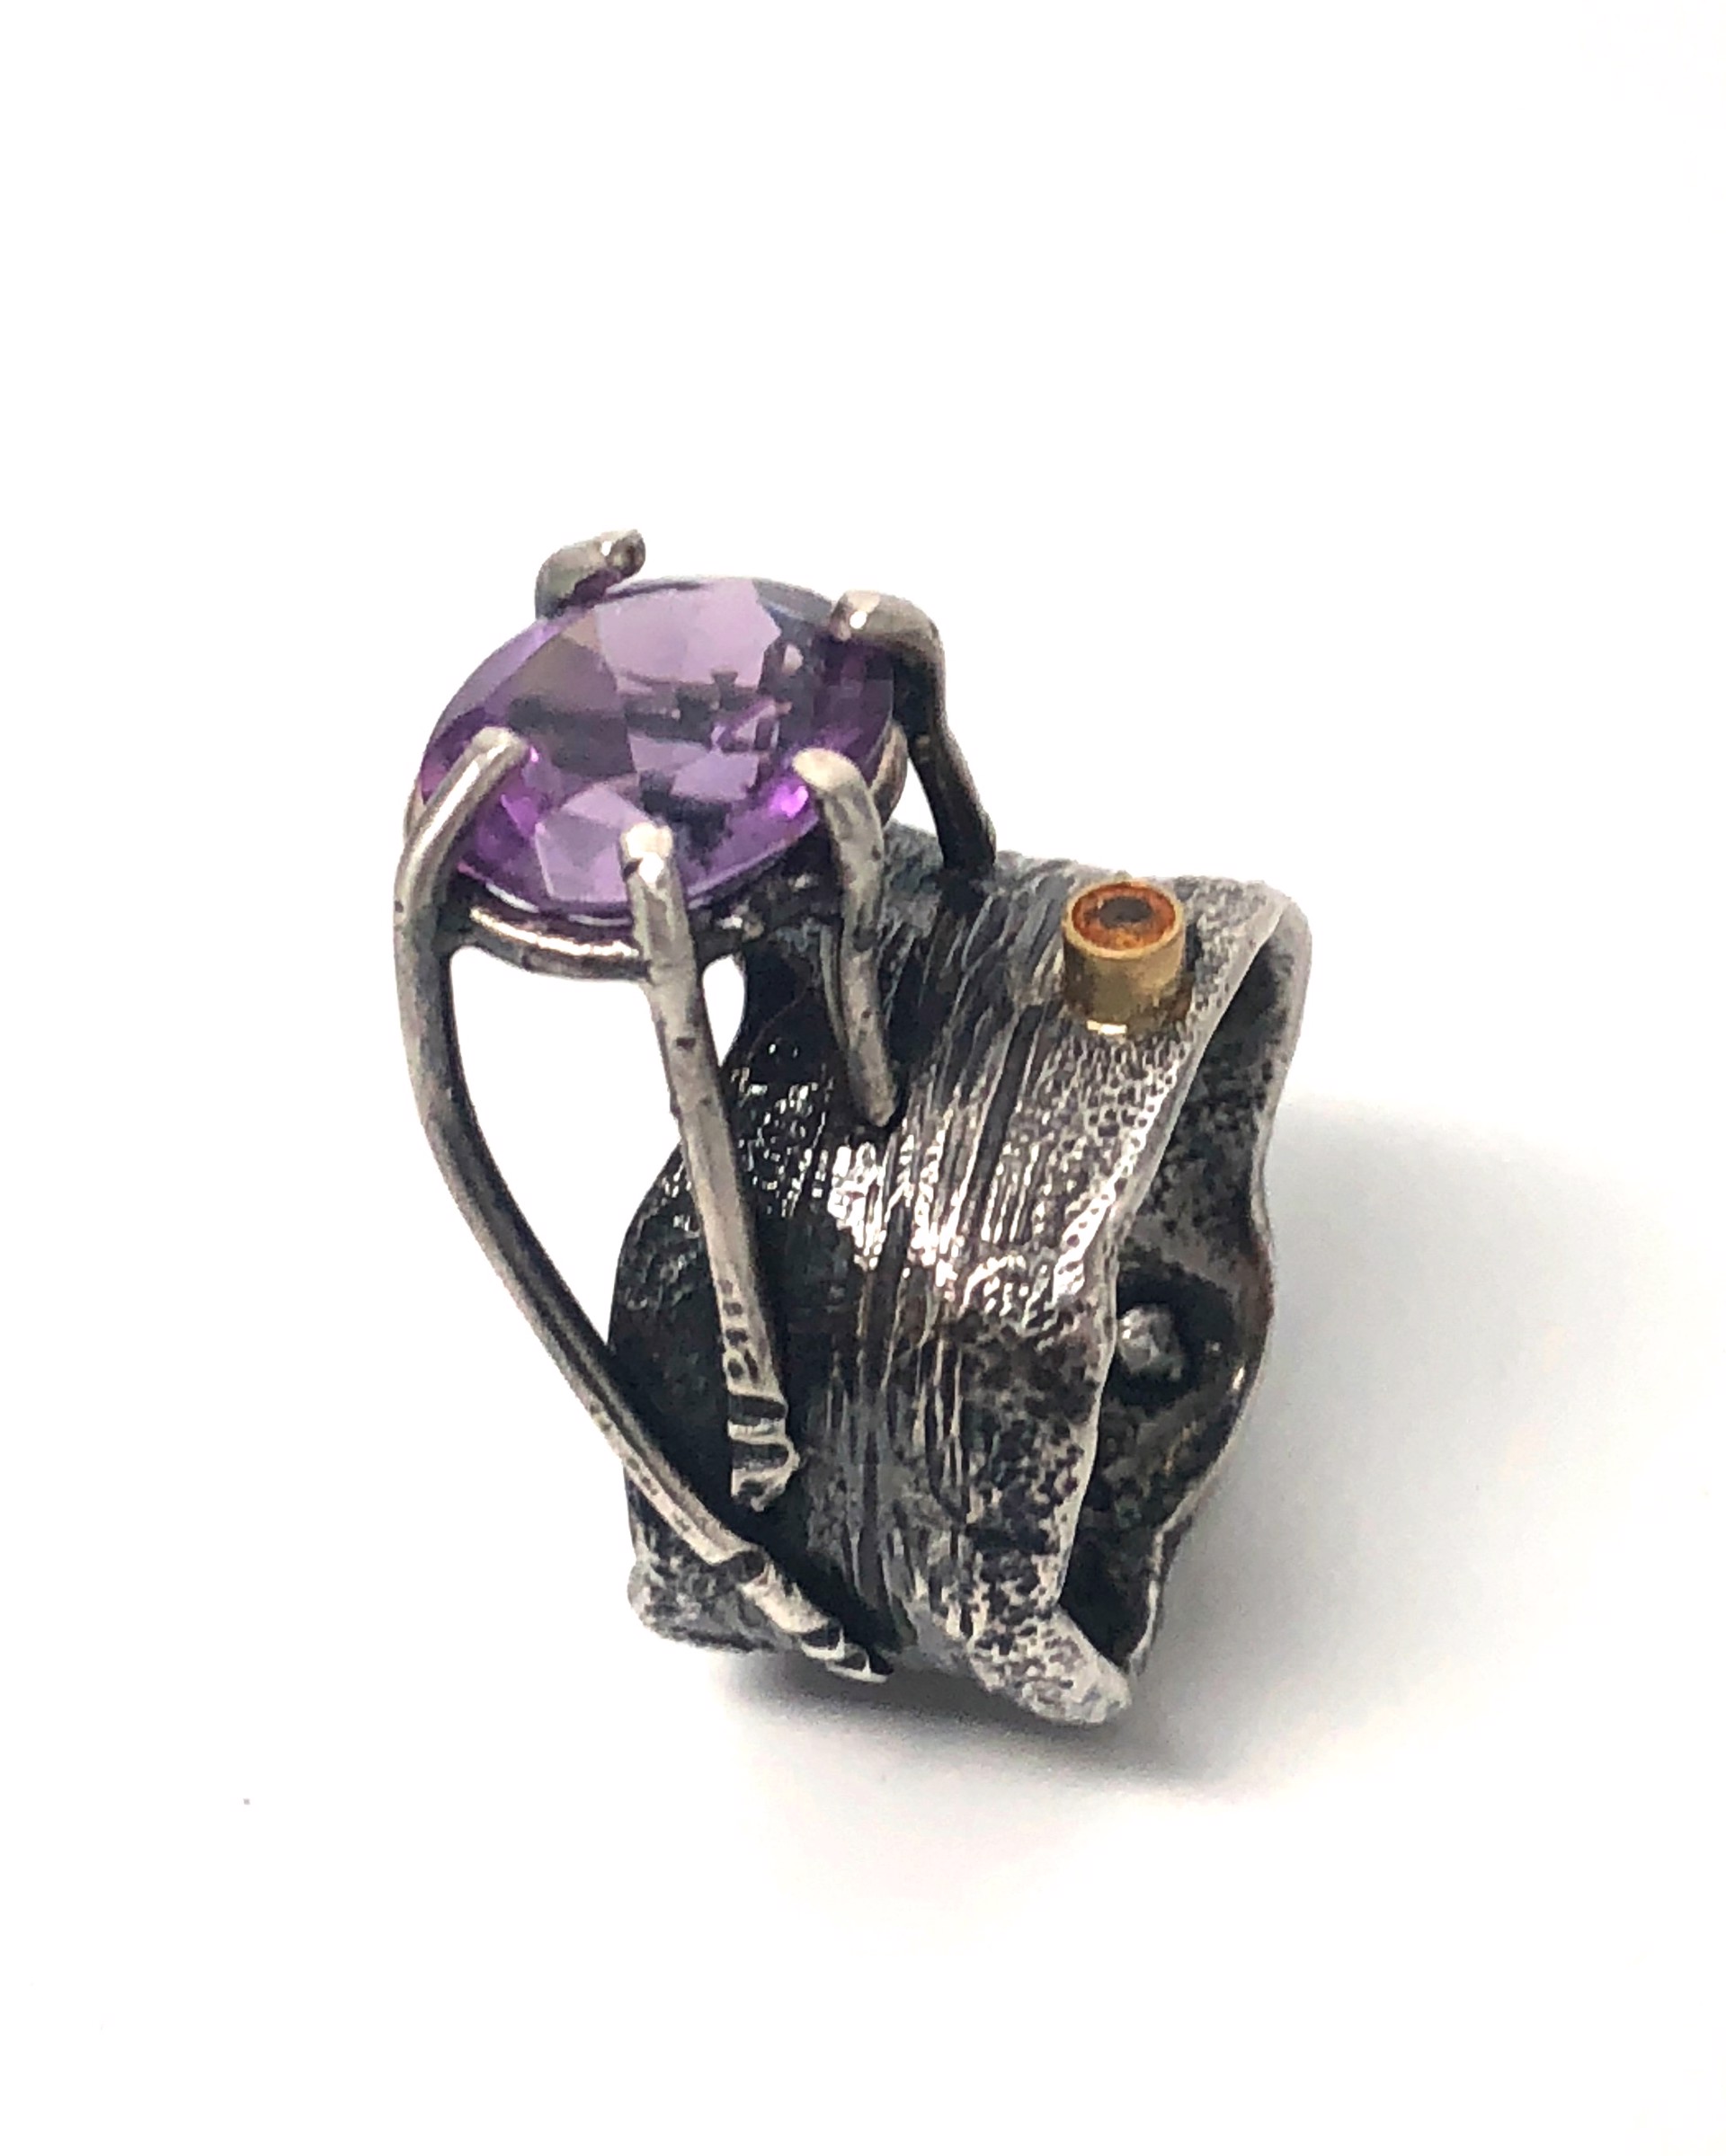 Amethyst & Sapphire Rooted Ring by Carli Schultz